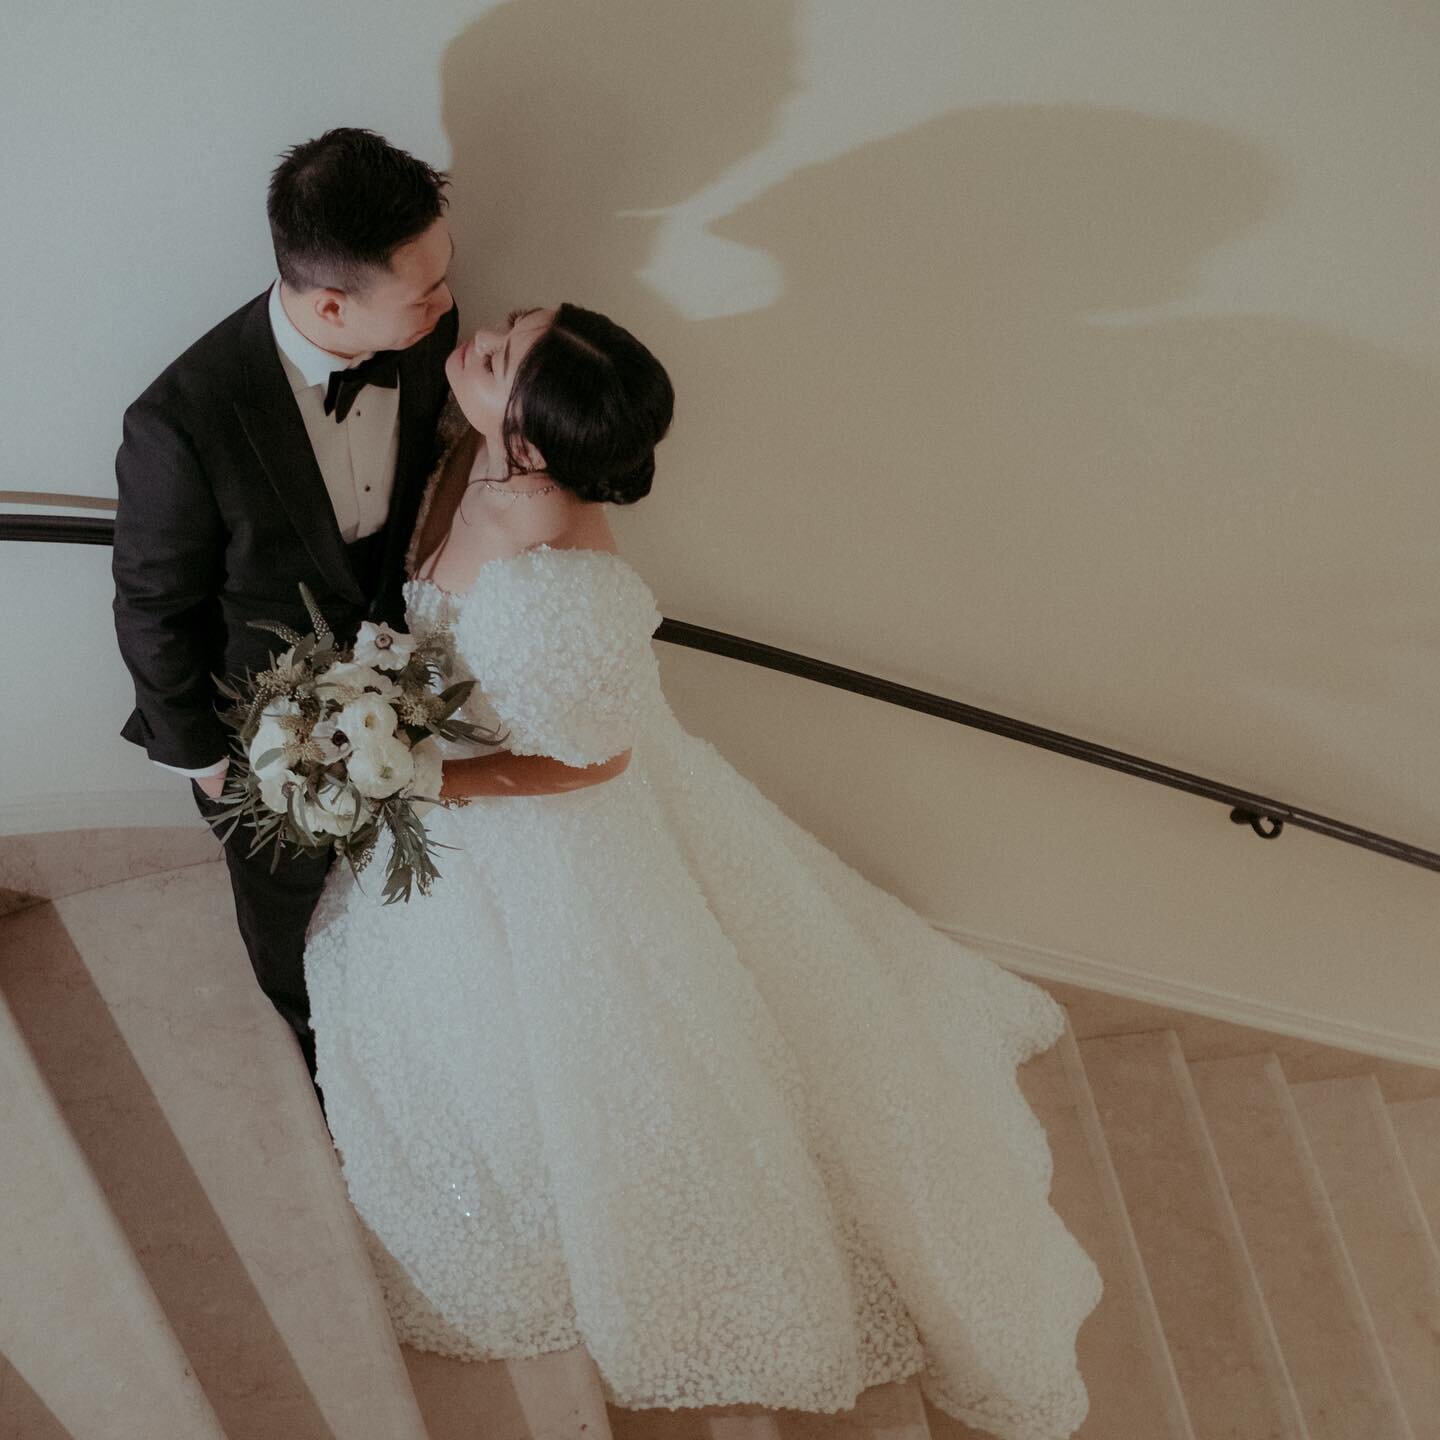 Looking forward to another wedding weekend ahead, but for now, taking a moment to admire this gorgeous couple 🤍

#haroldpratthouse #pratthousewedding #pratthousecouples #nycevents #nyceventspace #nyceventplanner #nycvenue